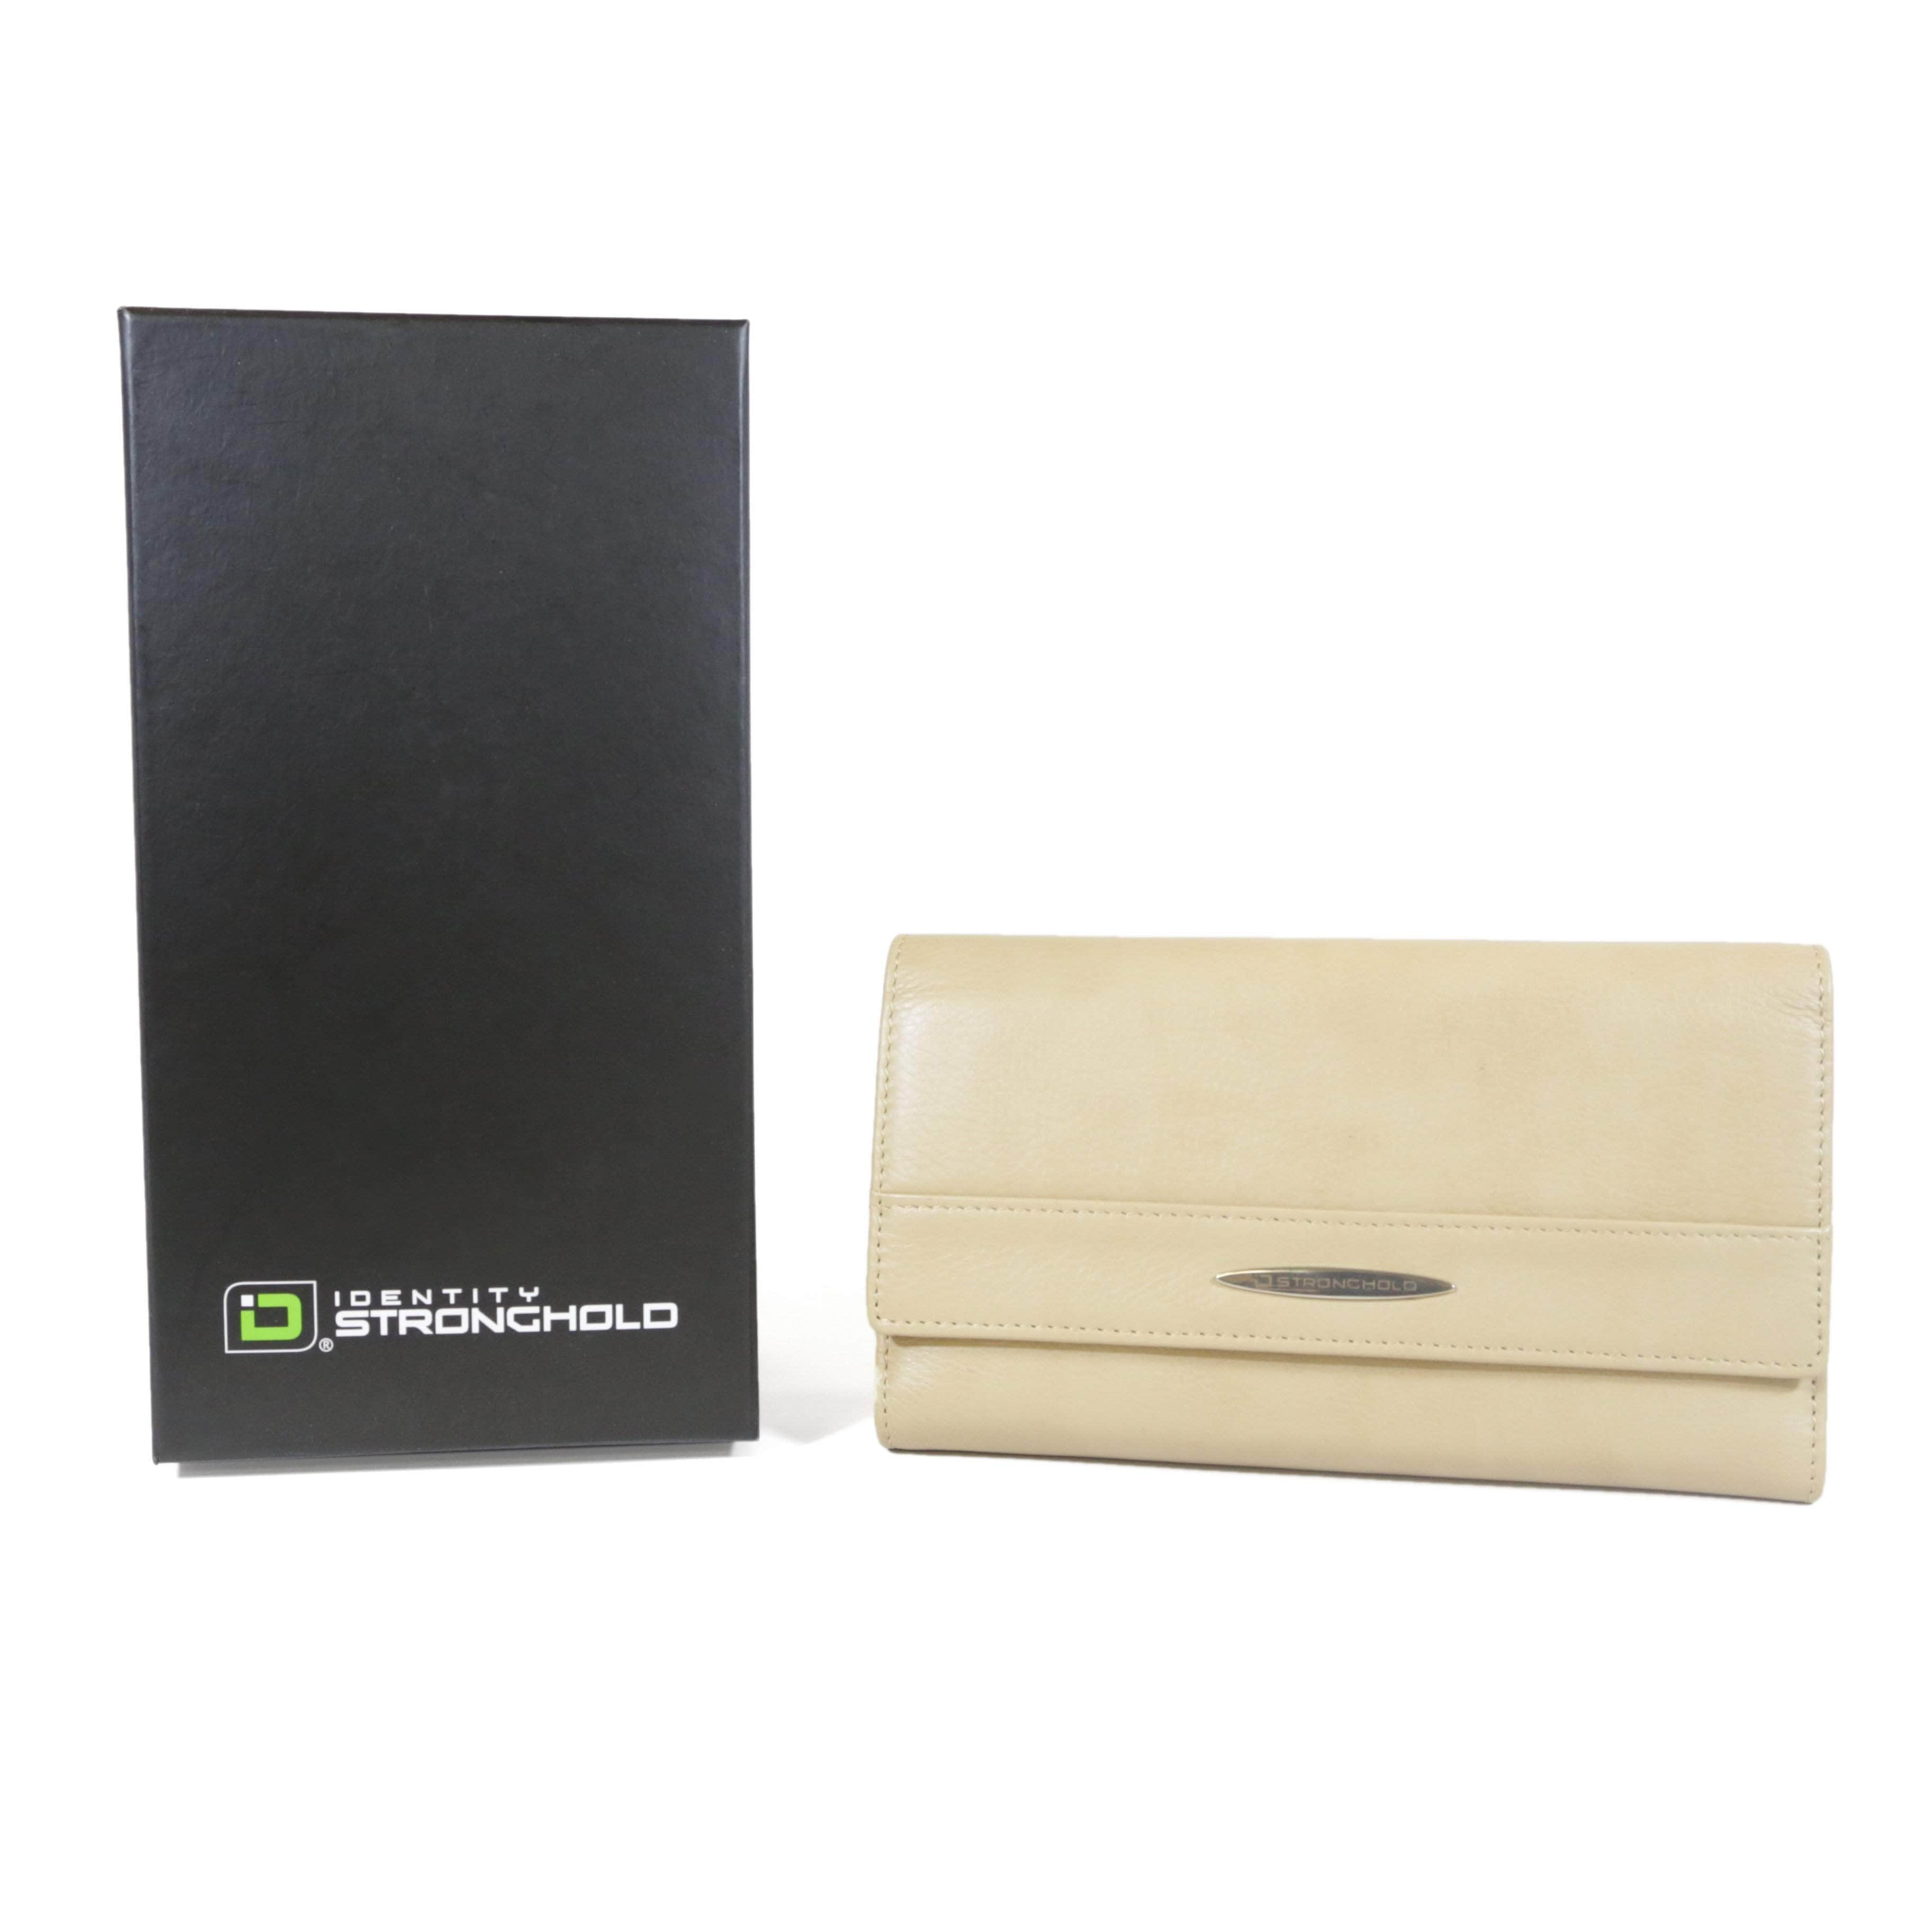 THE ONLY SLG WE NEVER HEAR ABOUT! Envelope Business Card Holder